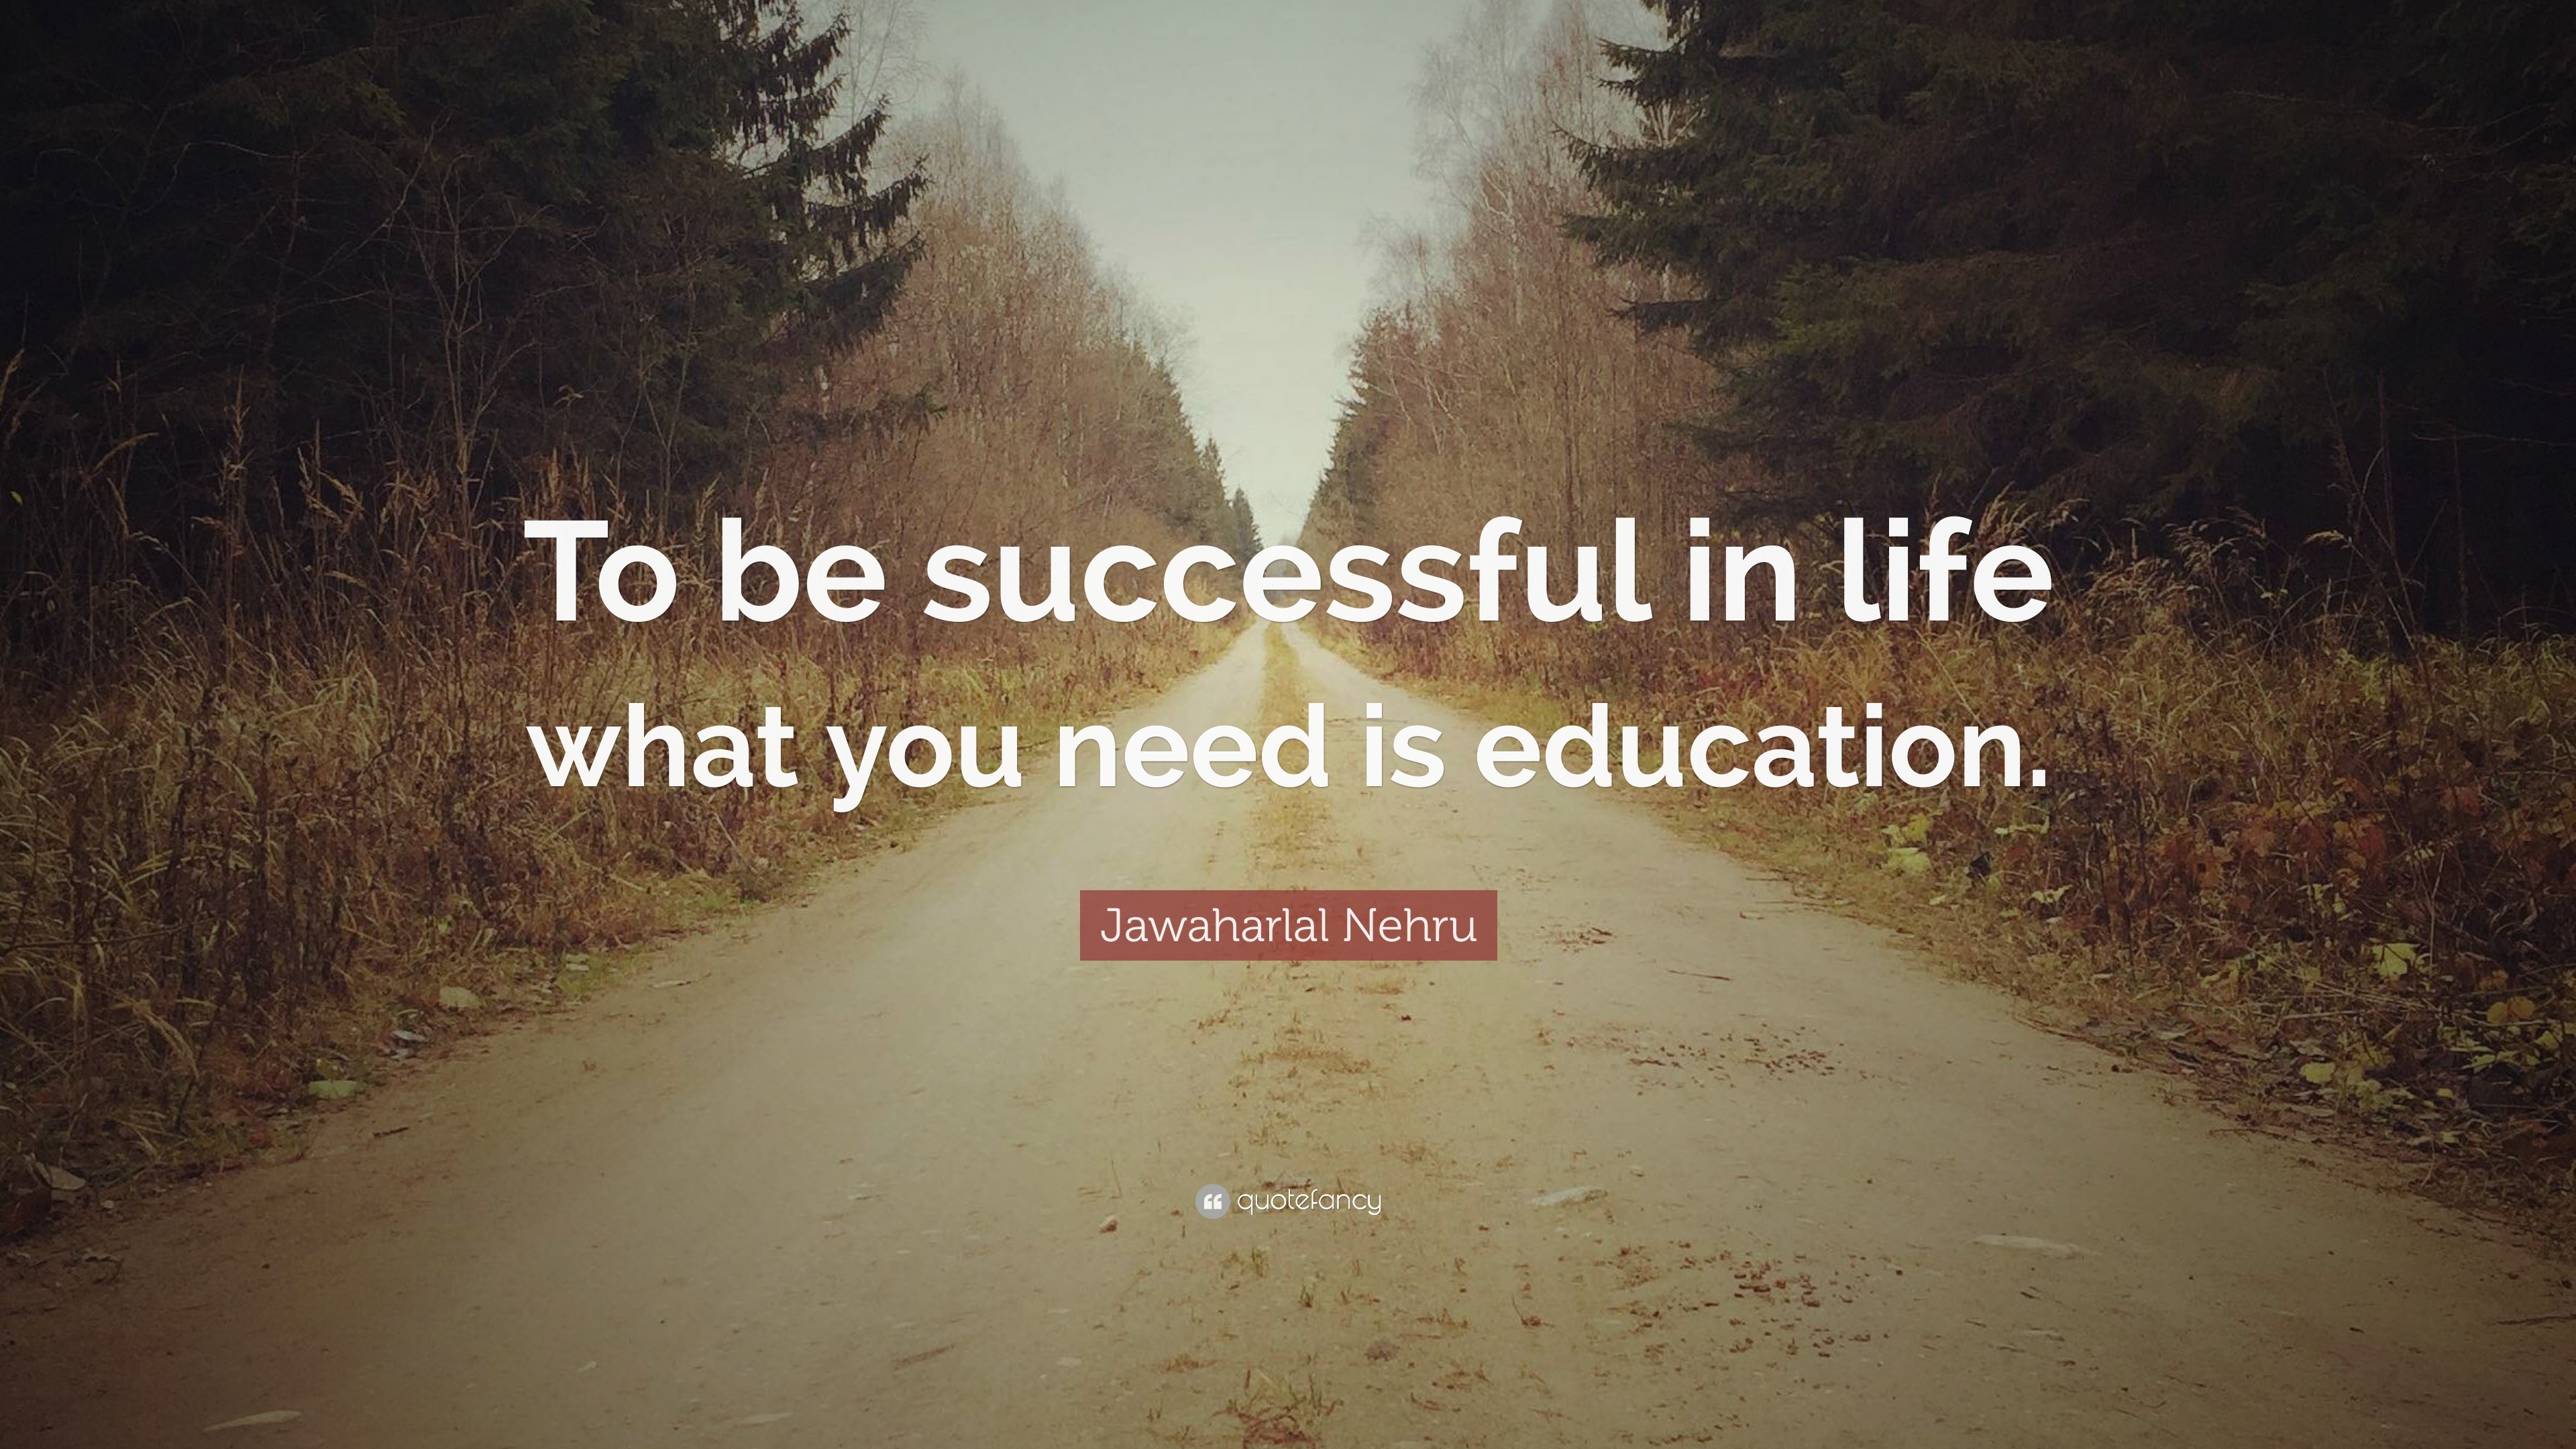 Jawaharlal Nehru Quote “to Be Successful In Life What You Need Is